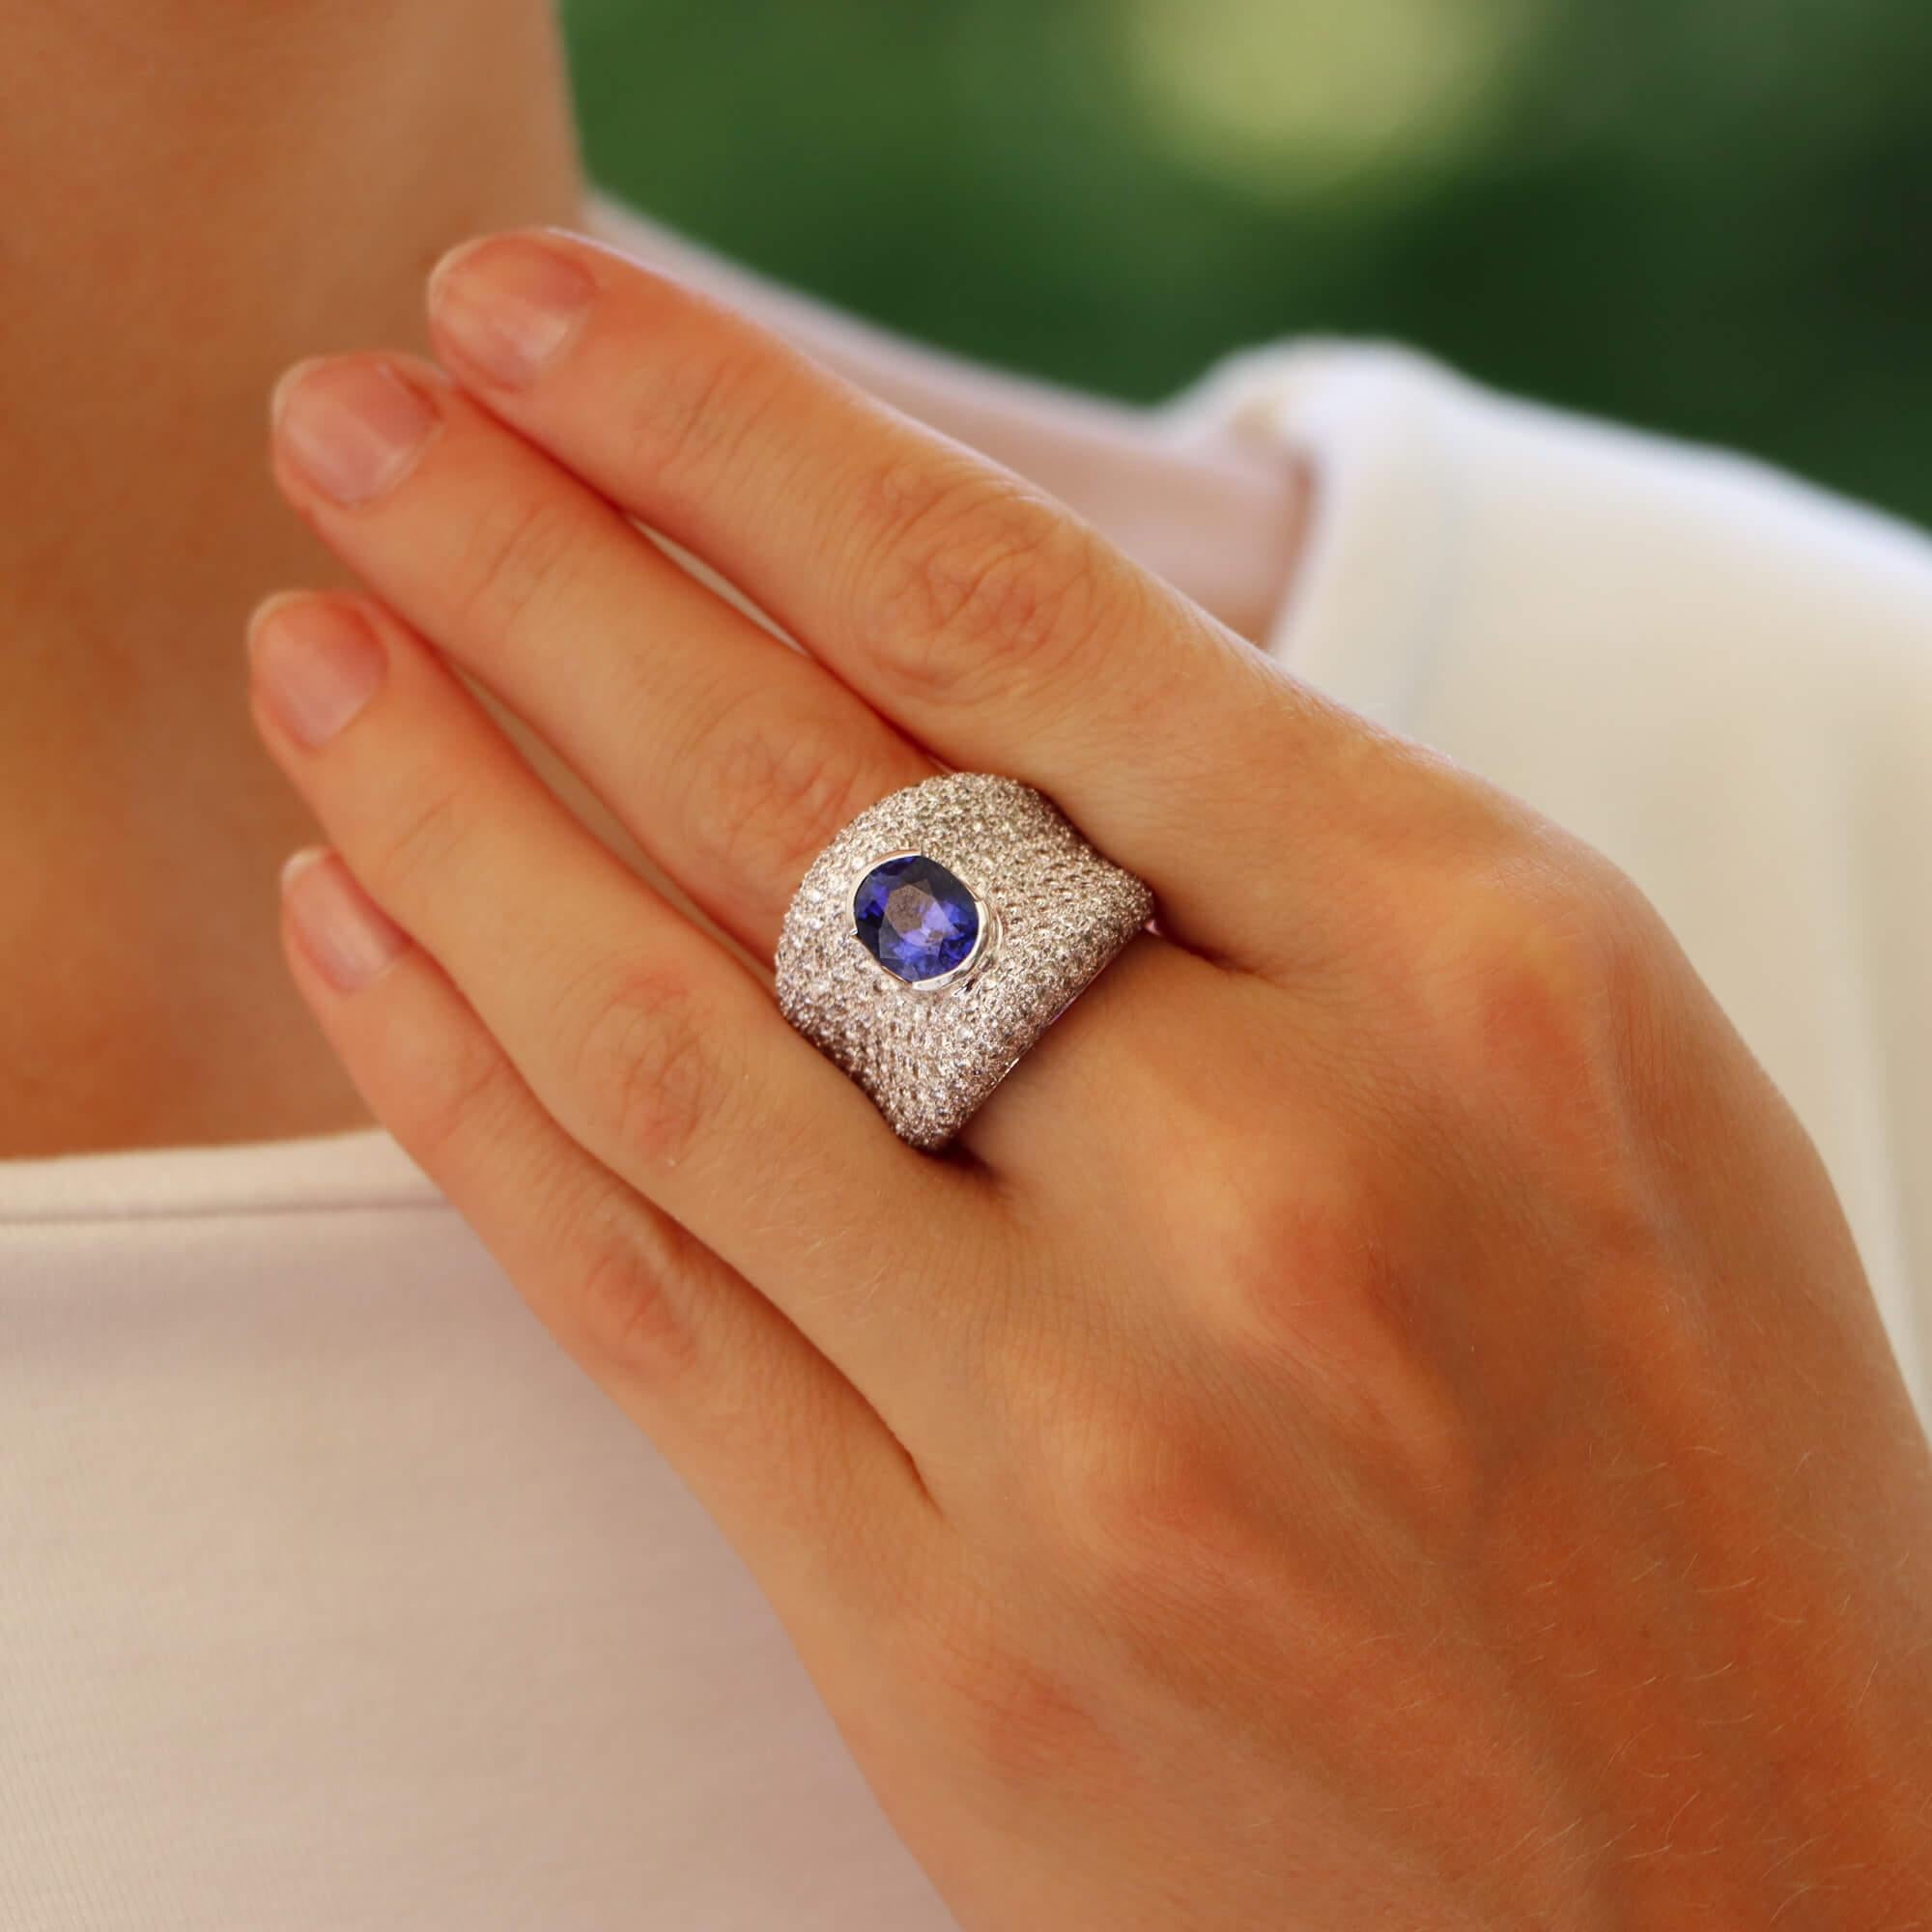  A beautiful vintage blue sapphire and diamond bombe dress ring set in 18k white gold.

This unique piece is composed in a bombe design and is centrally set with a vibrant oval cut blue sapphire stone. The sapphire is bezel set securely amongst a